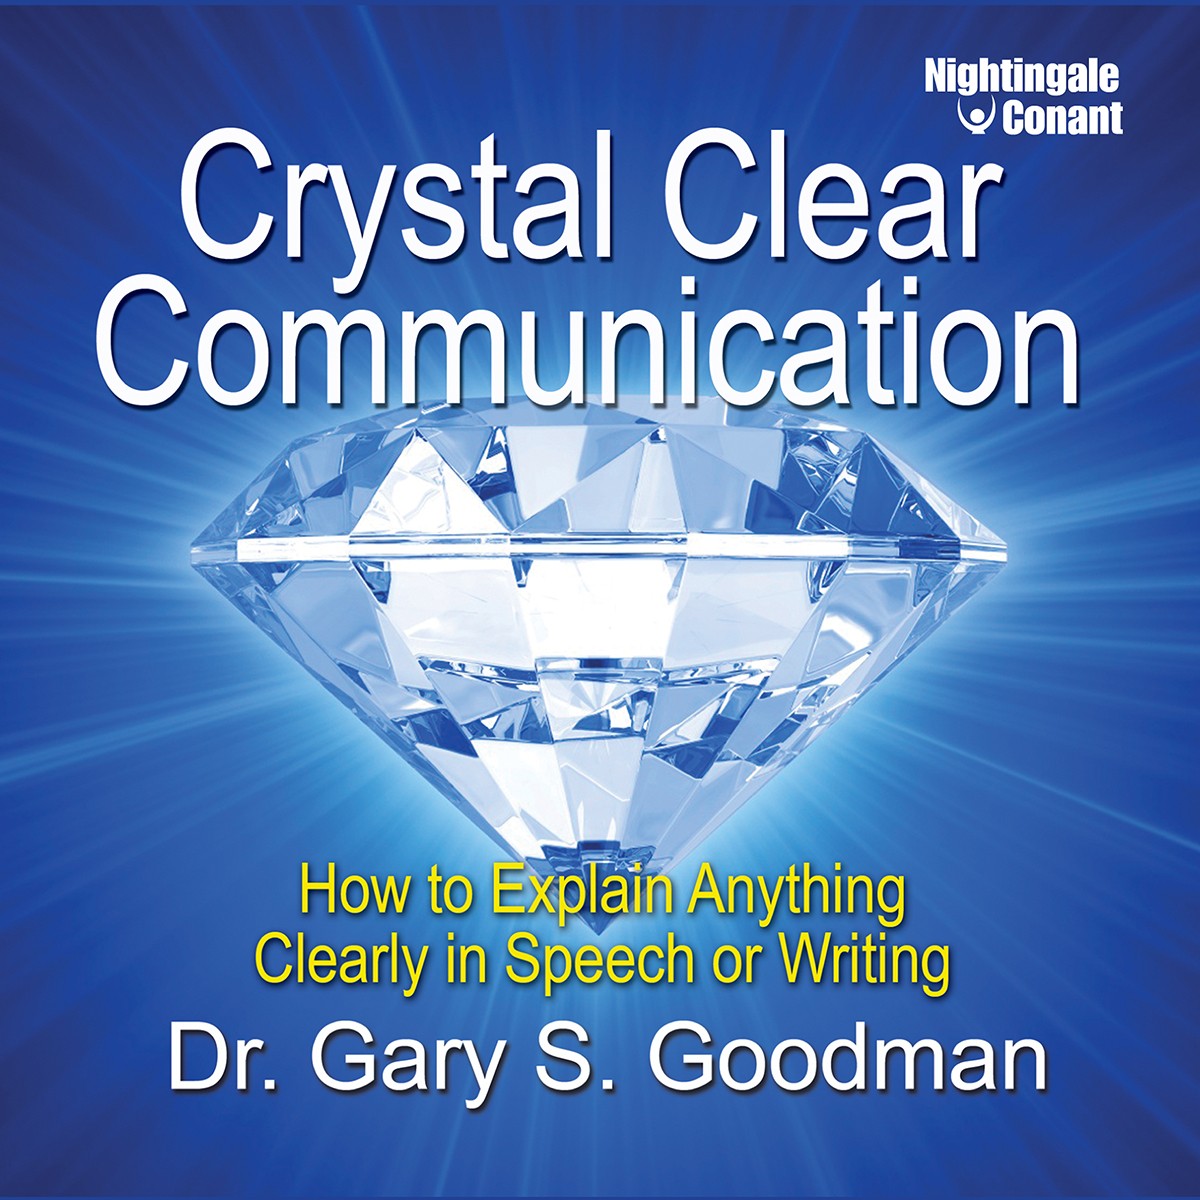 [GET] Dr. Gary S. Goodman – Crystal Clear Communication Download